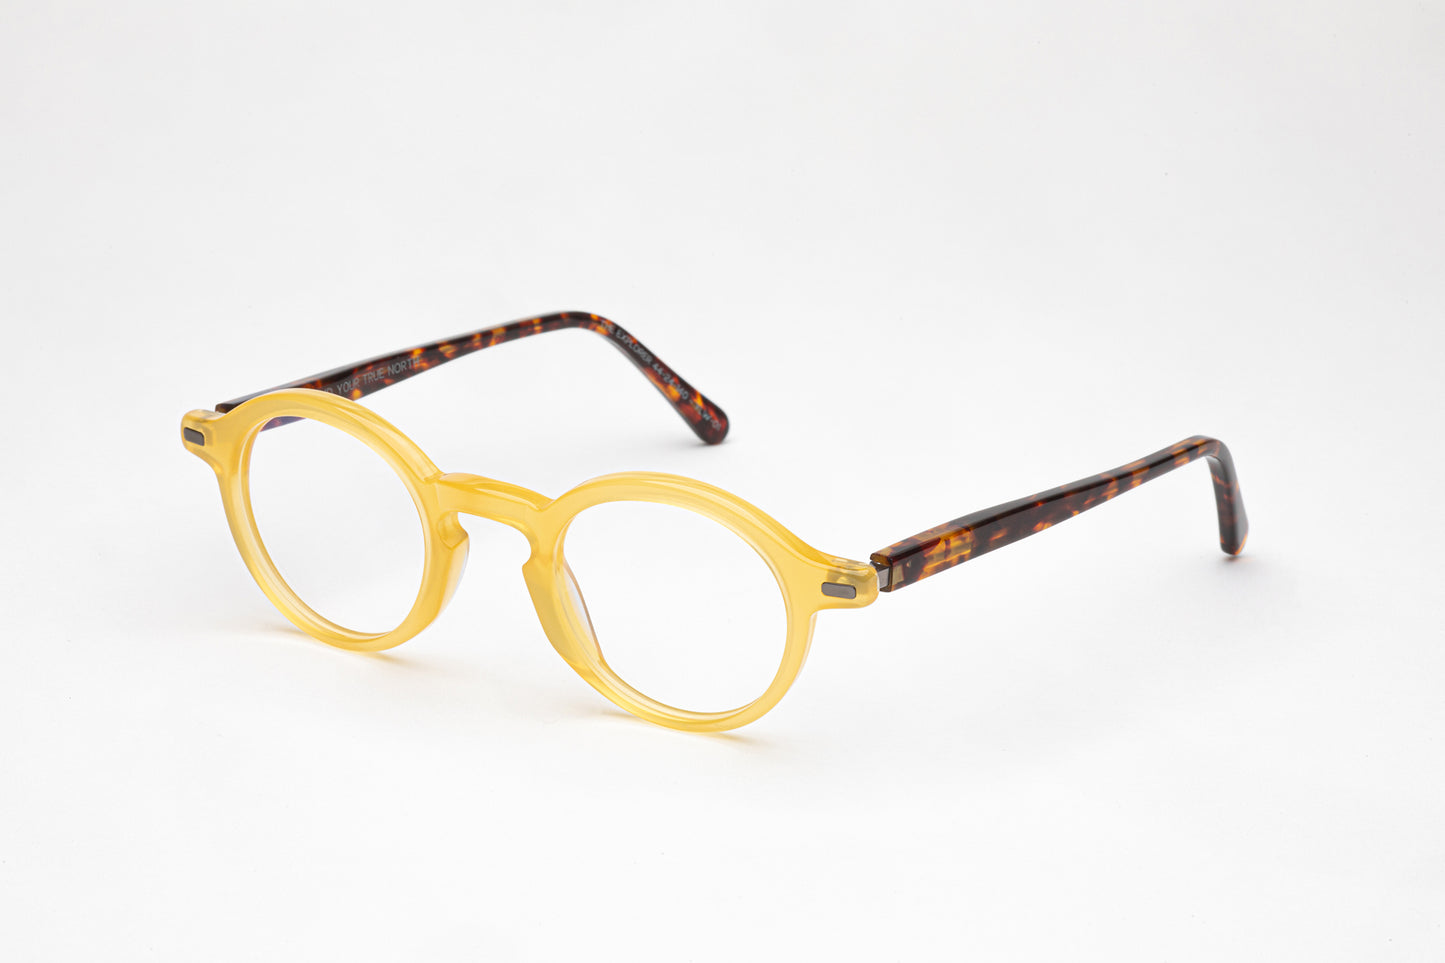 Angled view of The Explorer yellow glasses with tortoiseshell stems